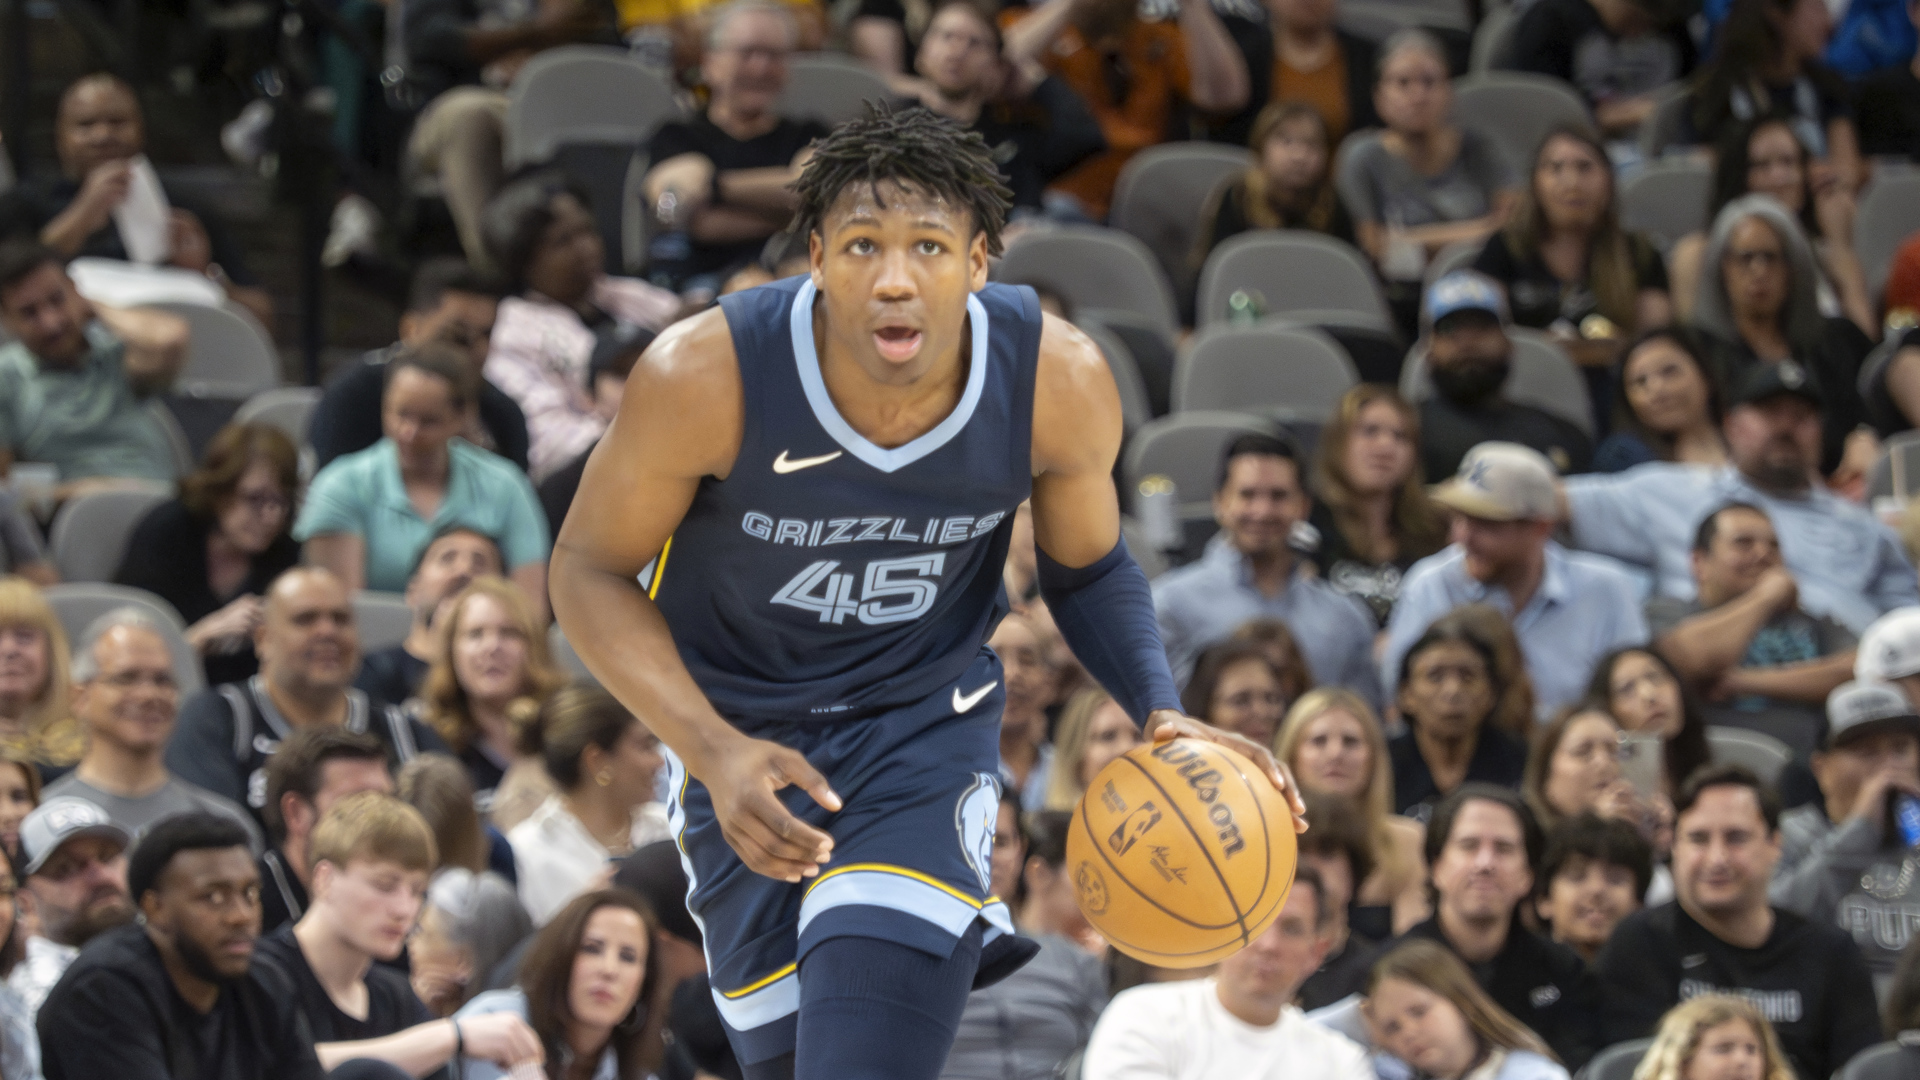 After a full season in the NBA, Memphis Grizzlies forward GG Jackson talks about what areas of his game needs improvement